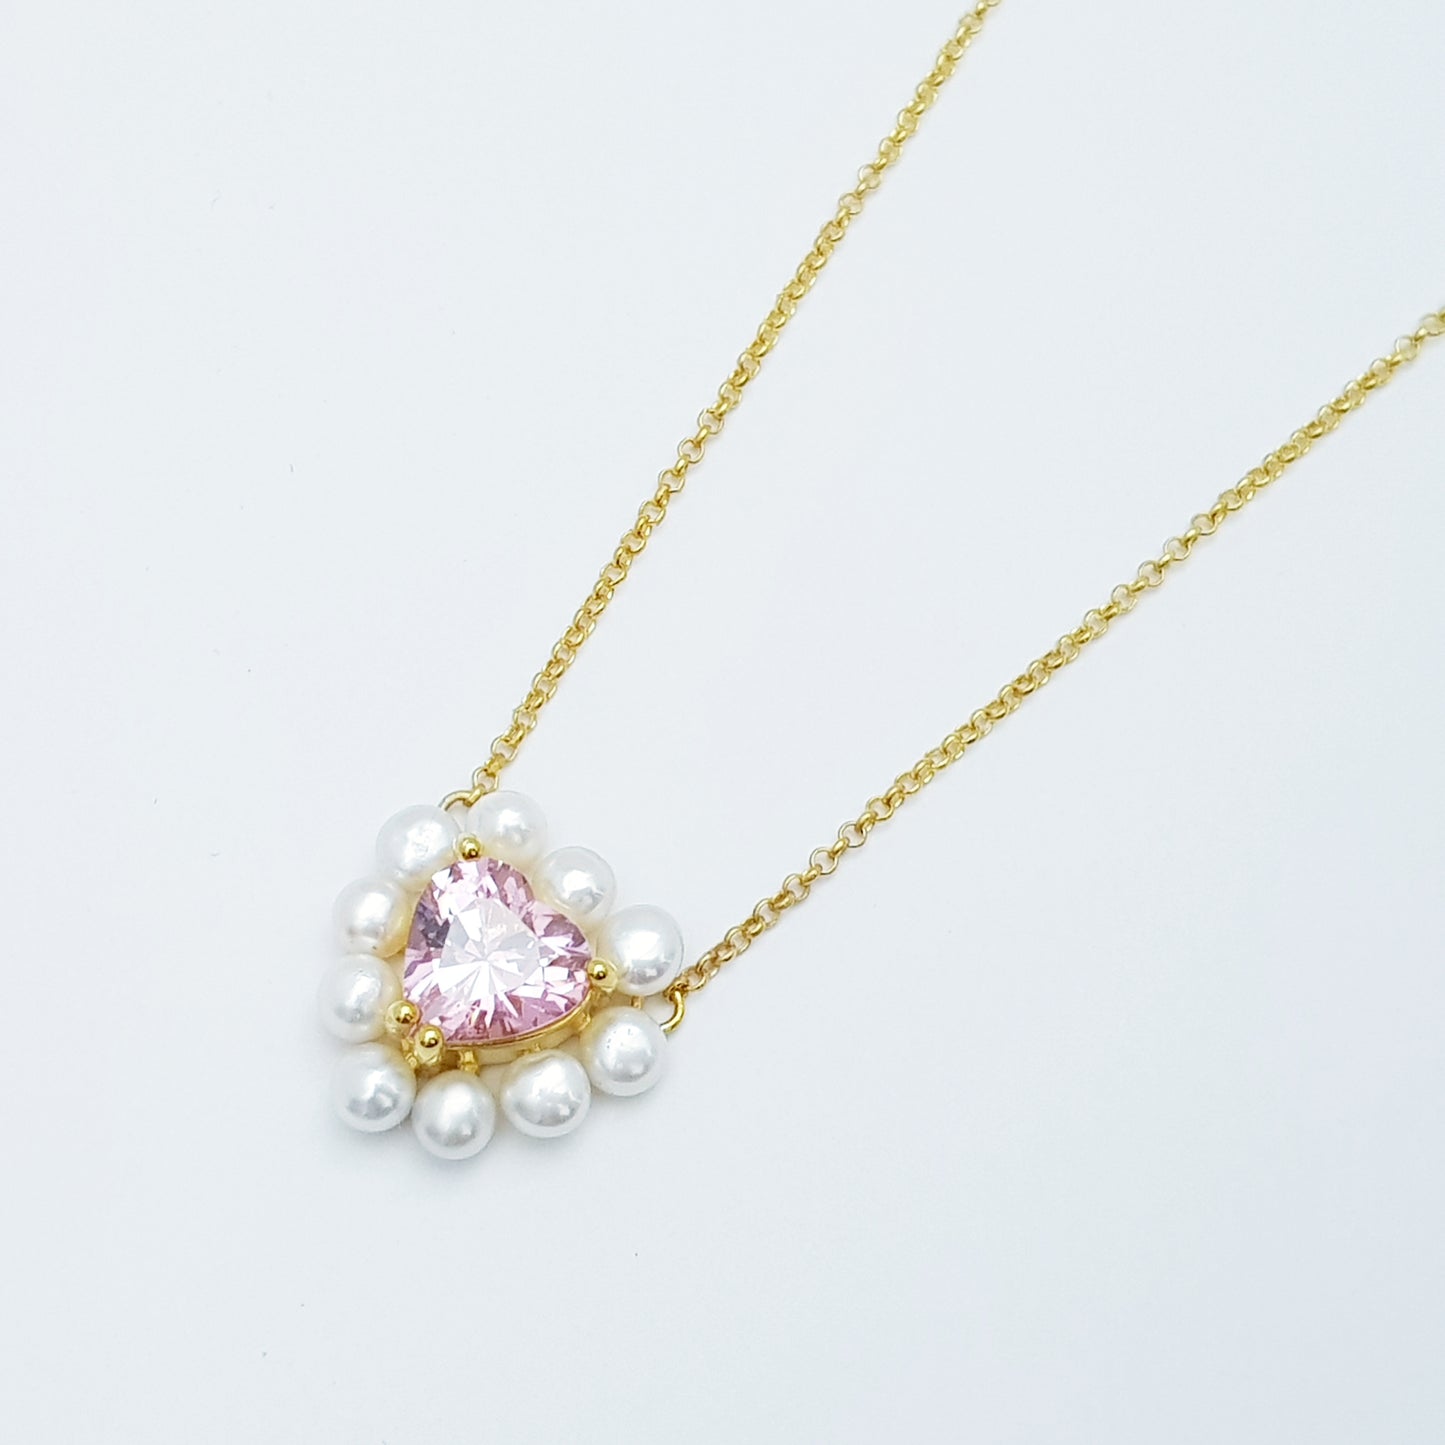 The Jade Necklace - Pink heart with halo of Pearls